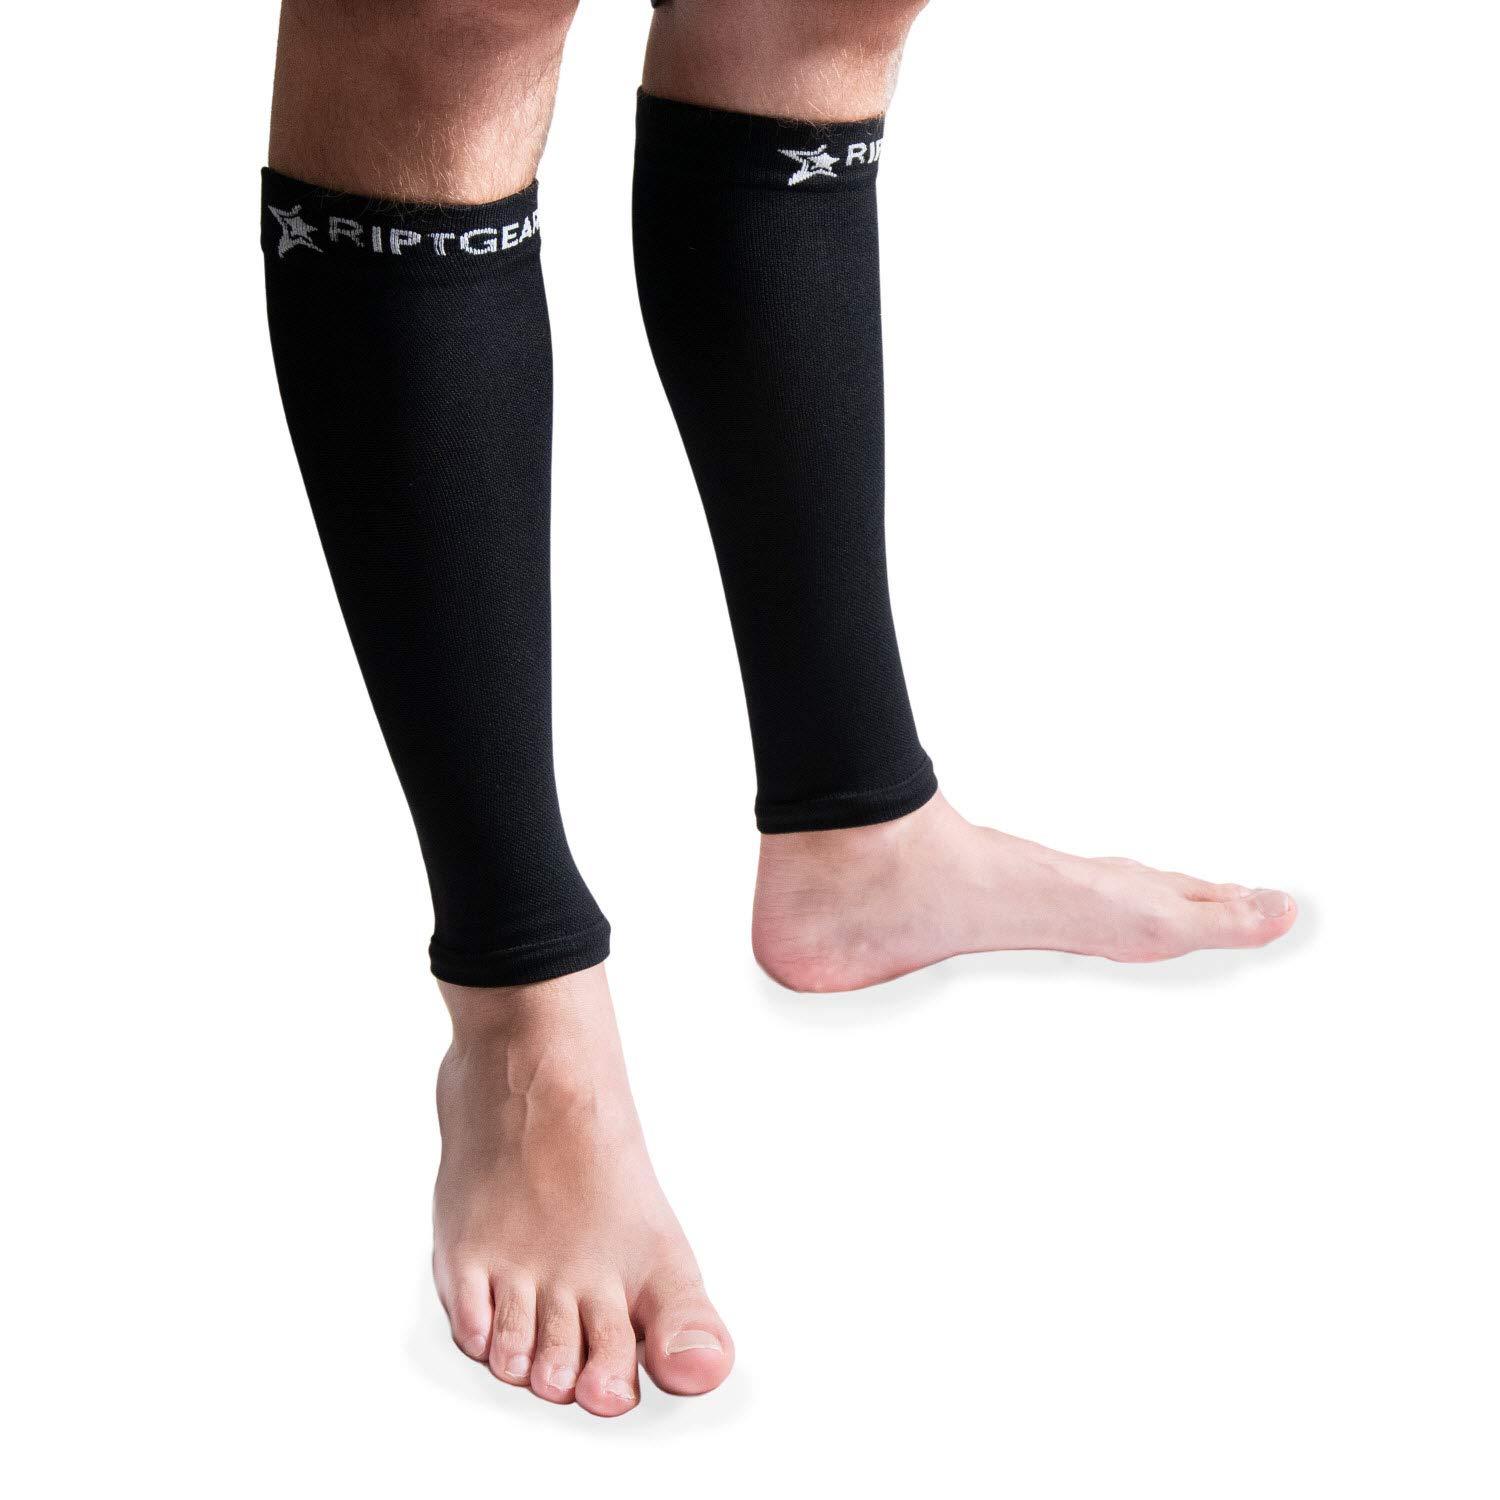 RiptGear Calf Compression Sleeves for Women and Men Graduated